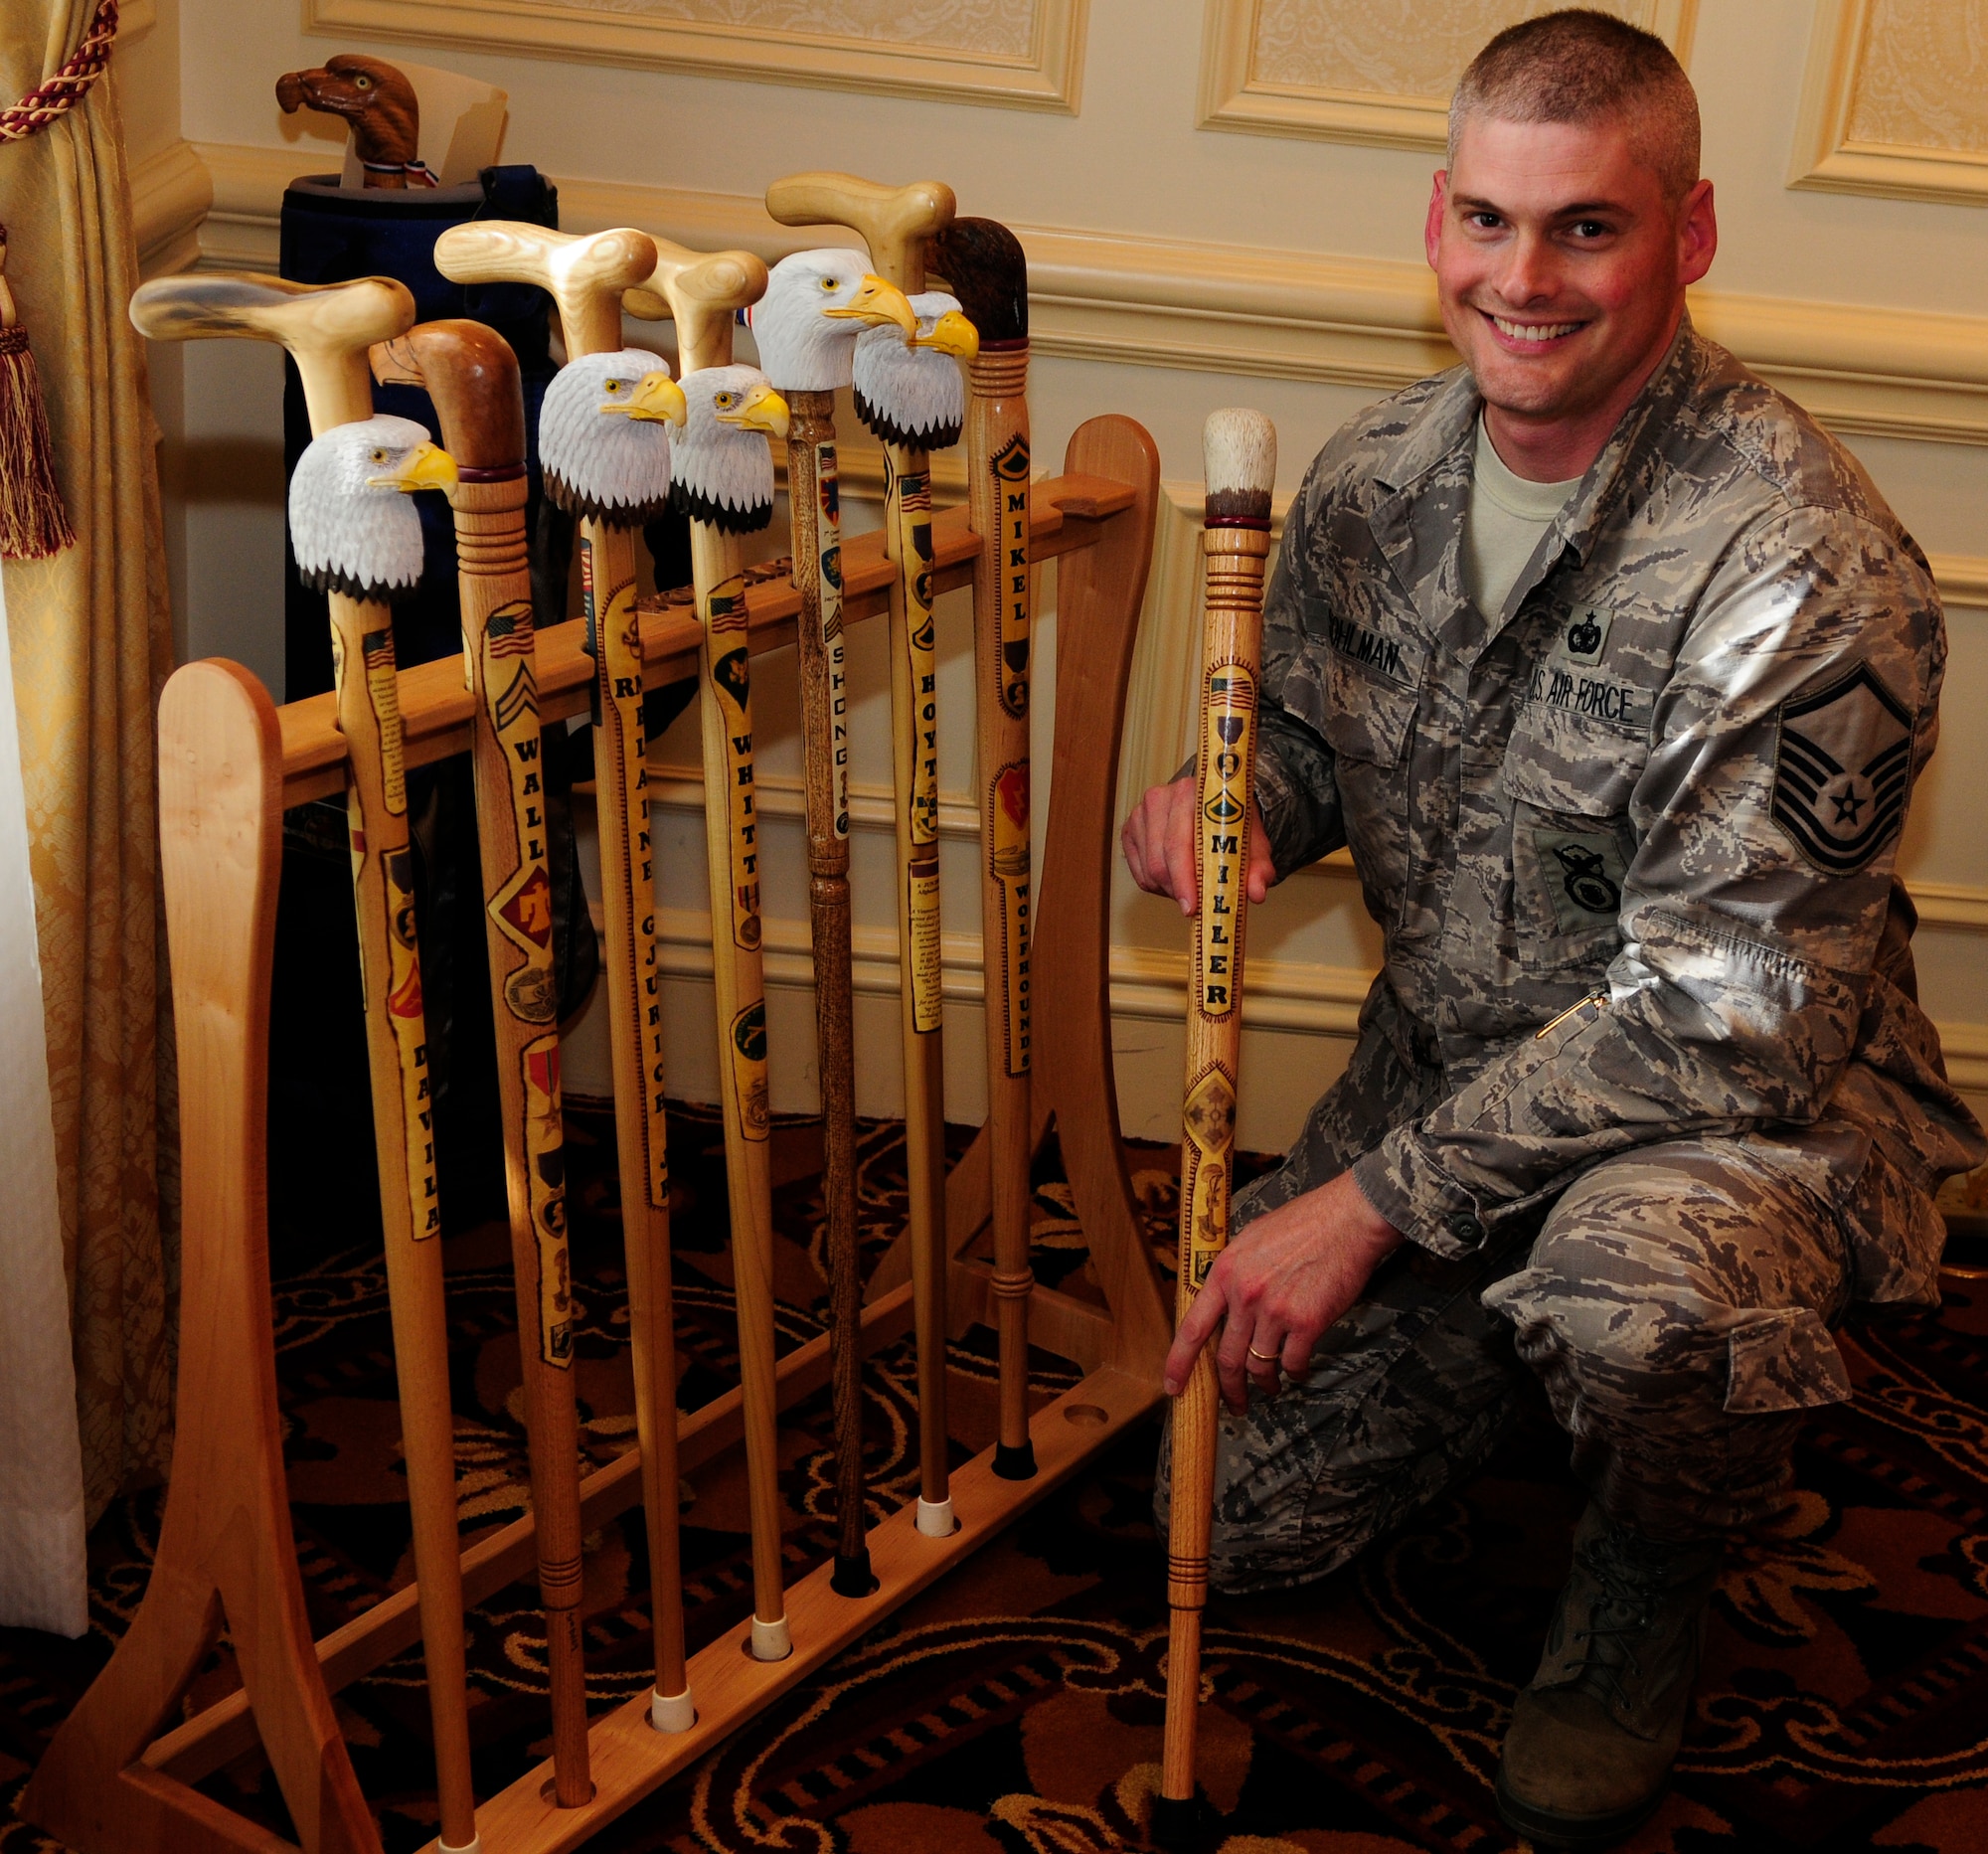 Master Sgt. Bruce Stohlman, Jr., Bolling Air Force Base Joint Visitors’ Center superintendent, poses with several finished eagle head canes Oct. 7 at the Walter Reed Medical Center in Washington, D.C. Sergeant Stohlman volunteers his woodworking skills hand-carving canes for wounded veterans with the Northern Virginia Woodcarvers as part of the Eagle Cane Project. The Eagle Cane Project is an off-shoot of Soldiers’ Angels, a non-profit organization providing aid and comfort to United States servicemembers and their families. (U.S. Air Force photo by Airman 1st Class Susan Moreno)